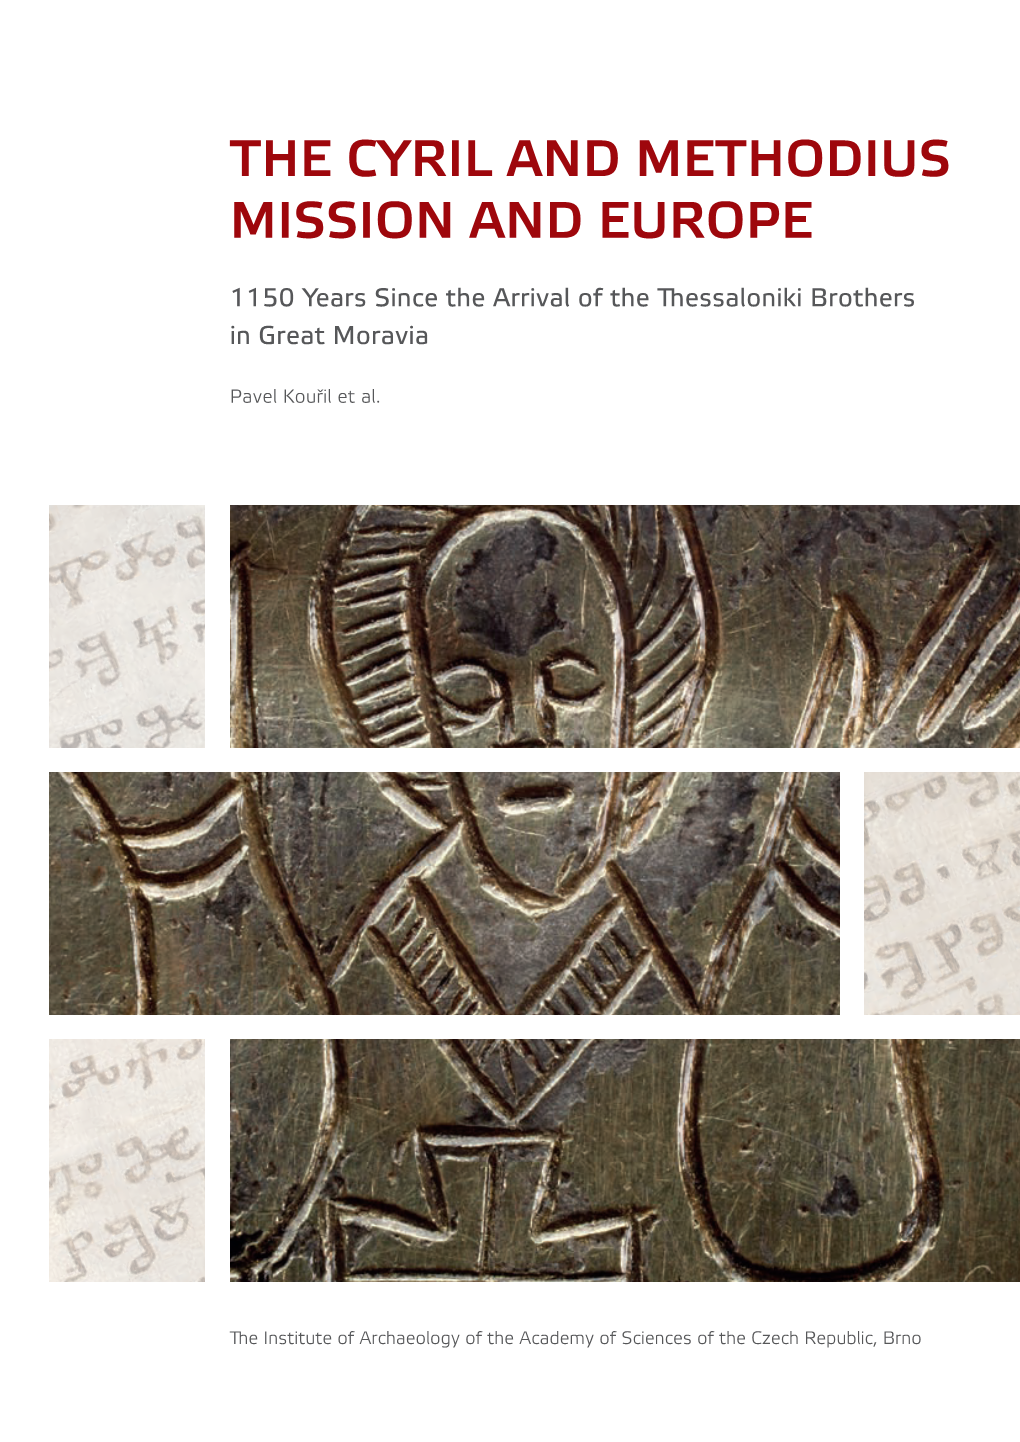 The Cyril and Methodius Mission and Europe